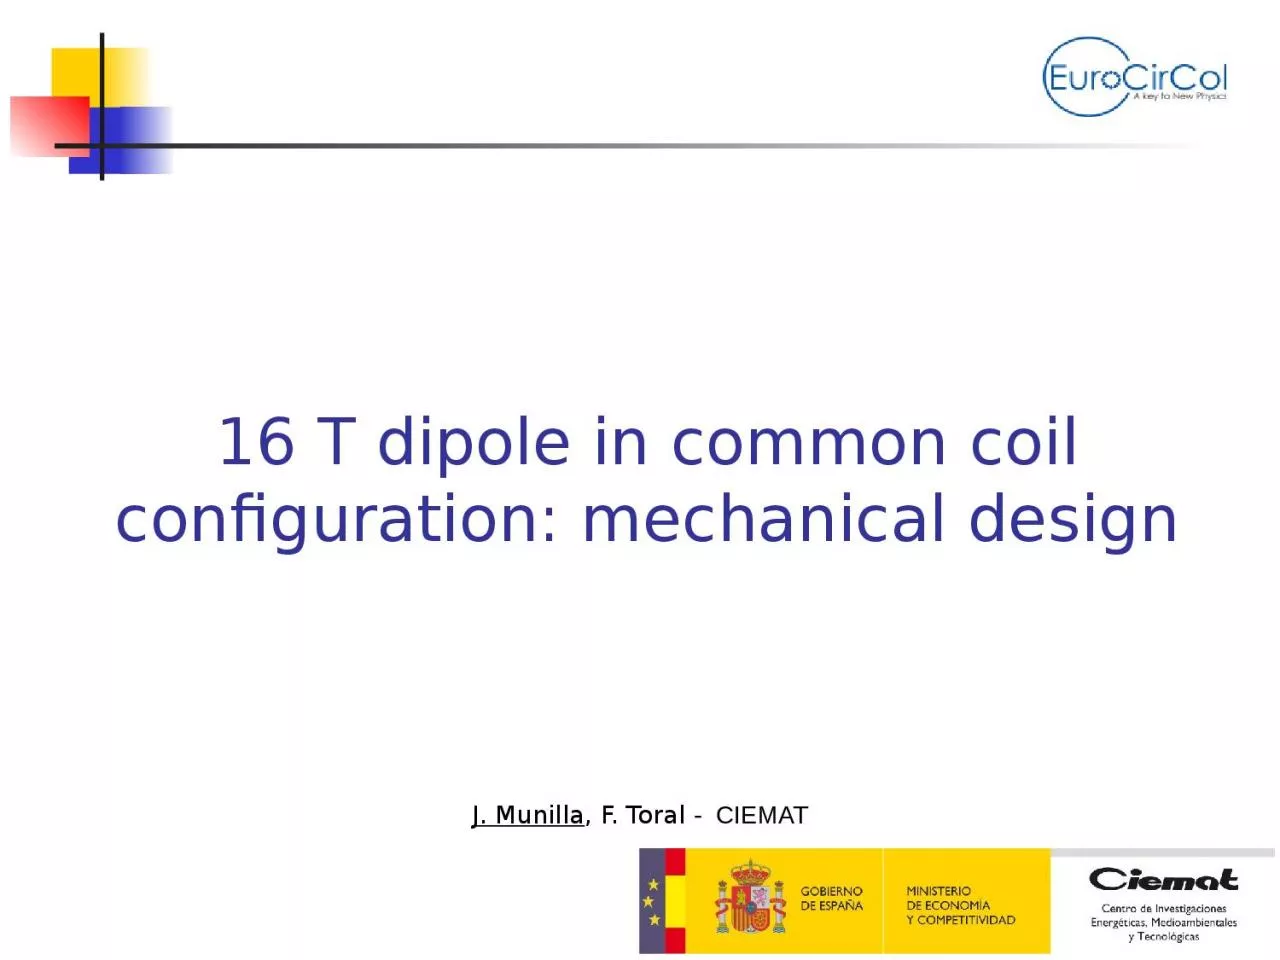 16 T dipole in common coil configuration: mechanical design